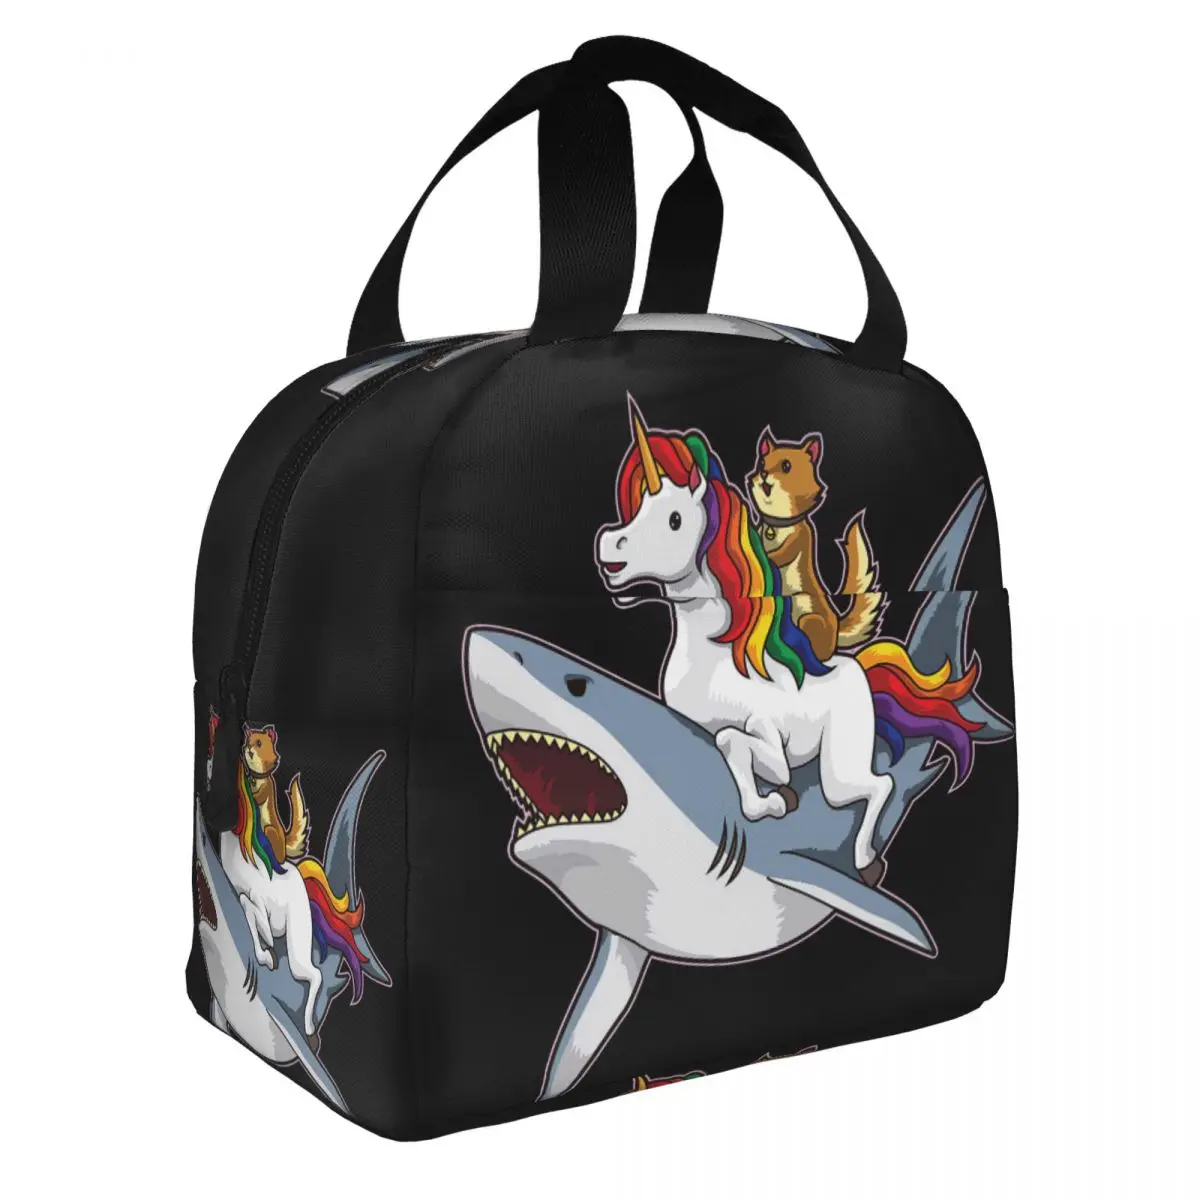 Shark Unicorn Cat Awesome Friendship Lunch Bento Bags Portable Aluminum Foil thickened Thermal Cloth Lunch Bag for Women Men Boy